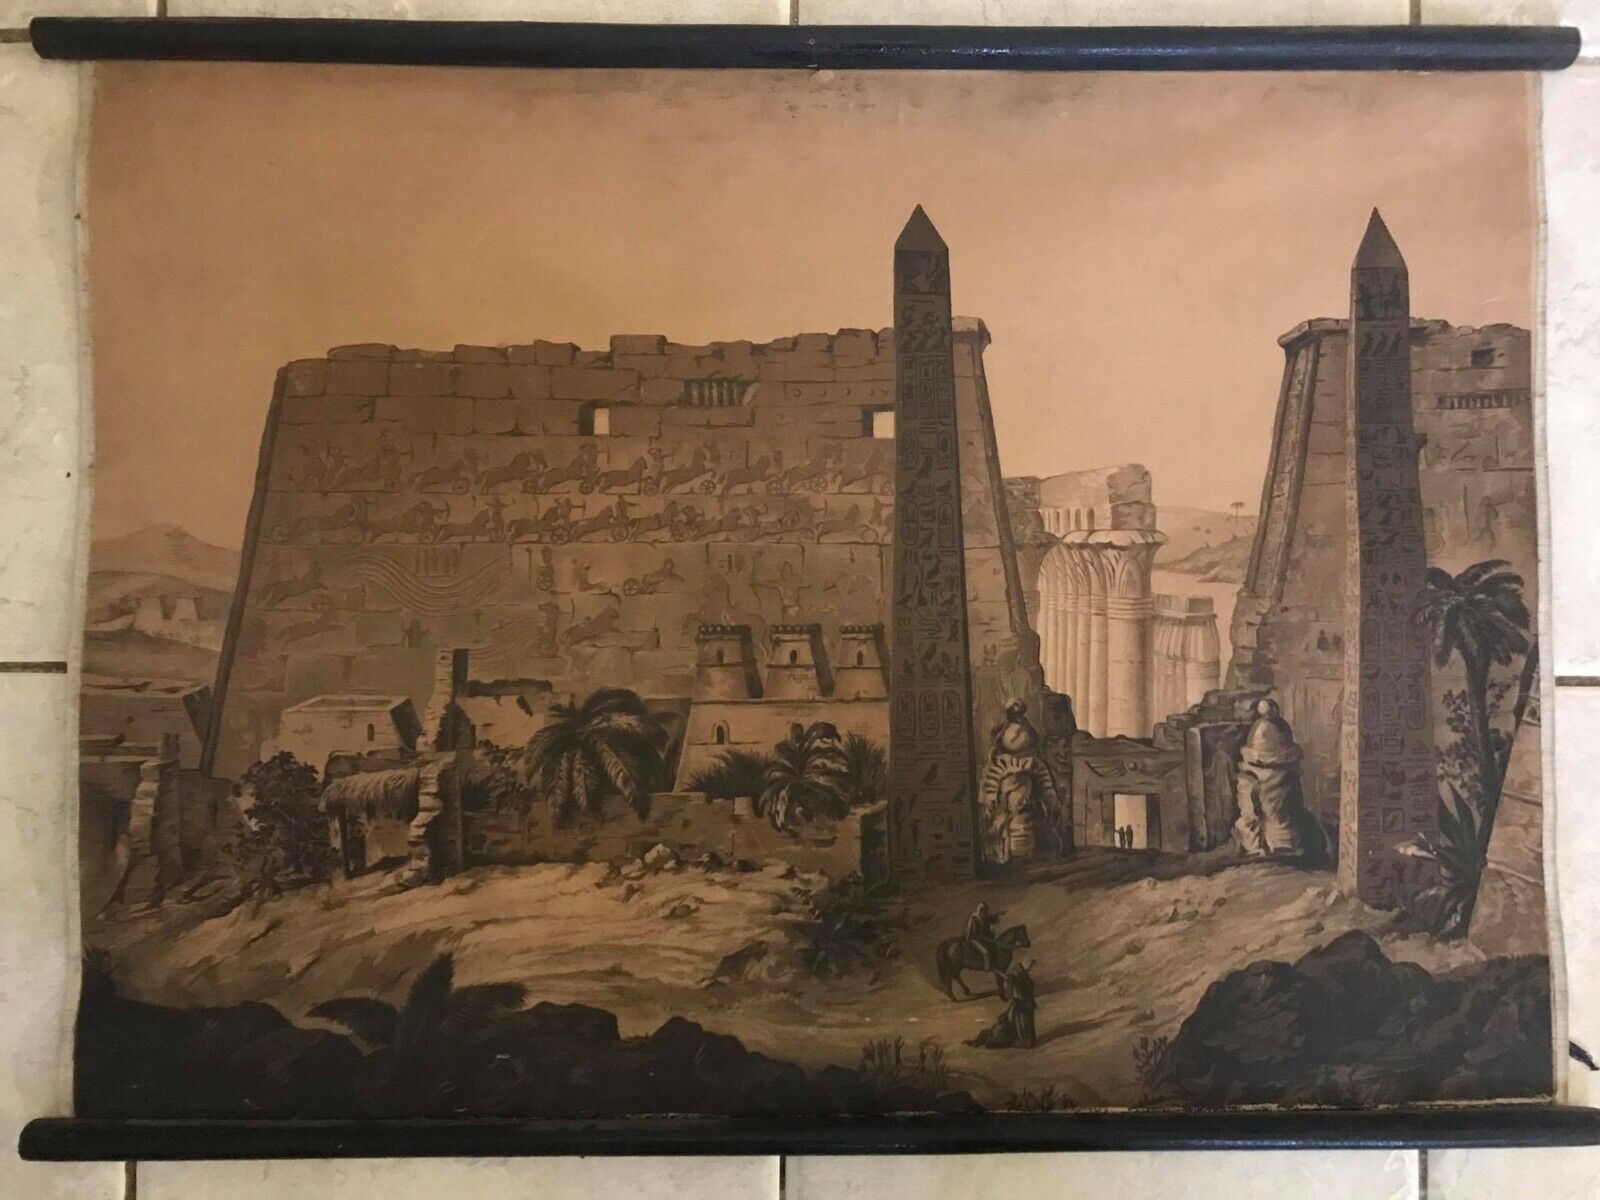 Temple in Luxor, Egypt - litograph poster